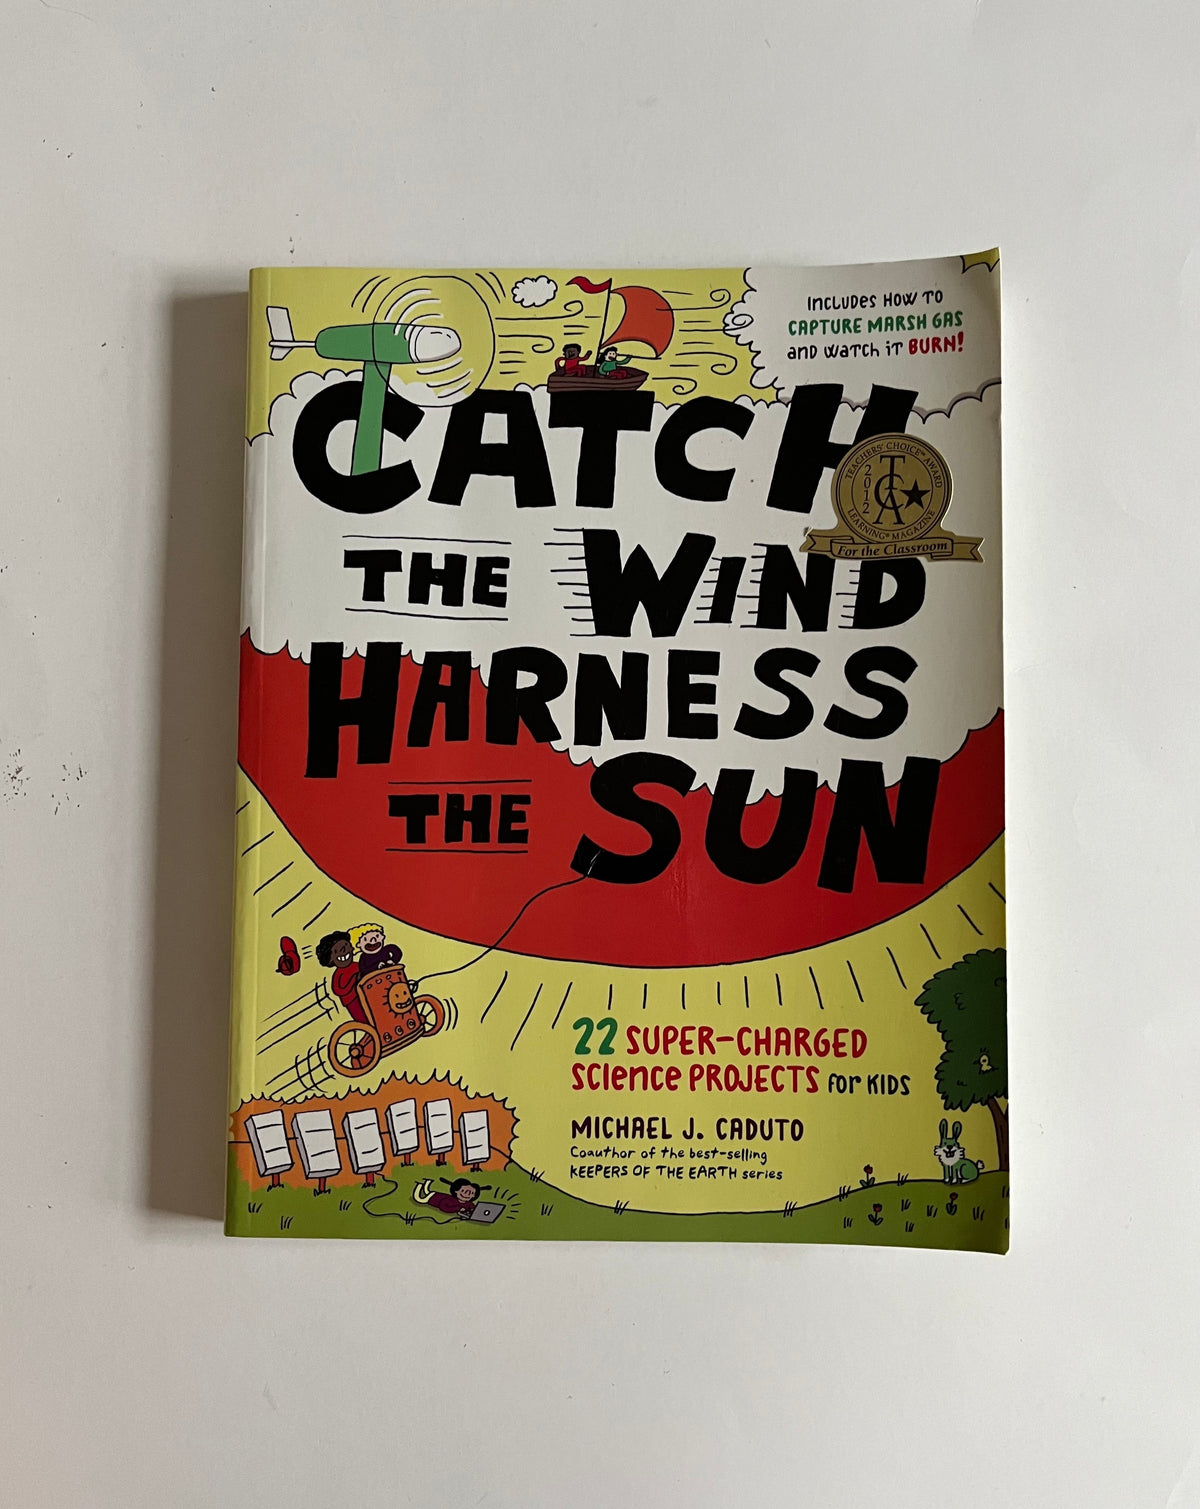 Catch the Wind Harness the Sun: 22 Super-Charged Science Projects for Kids by Michael Caduto